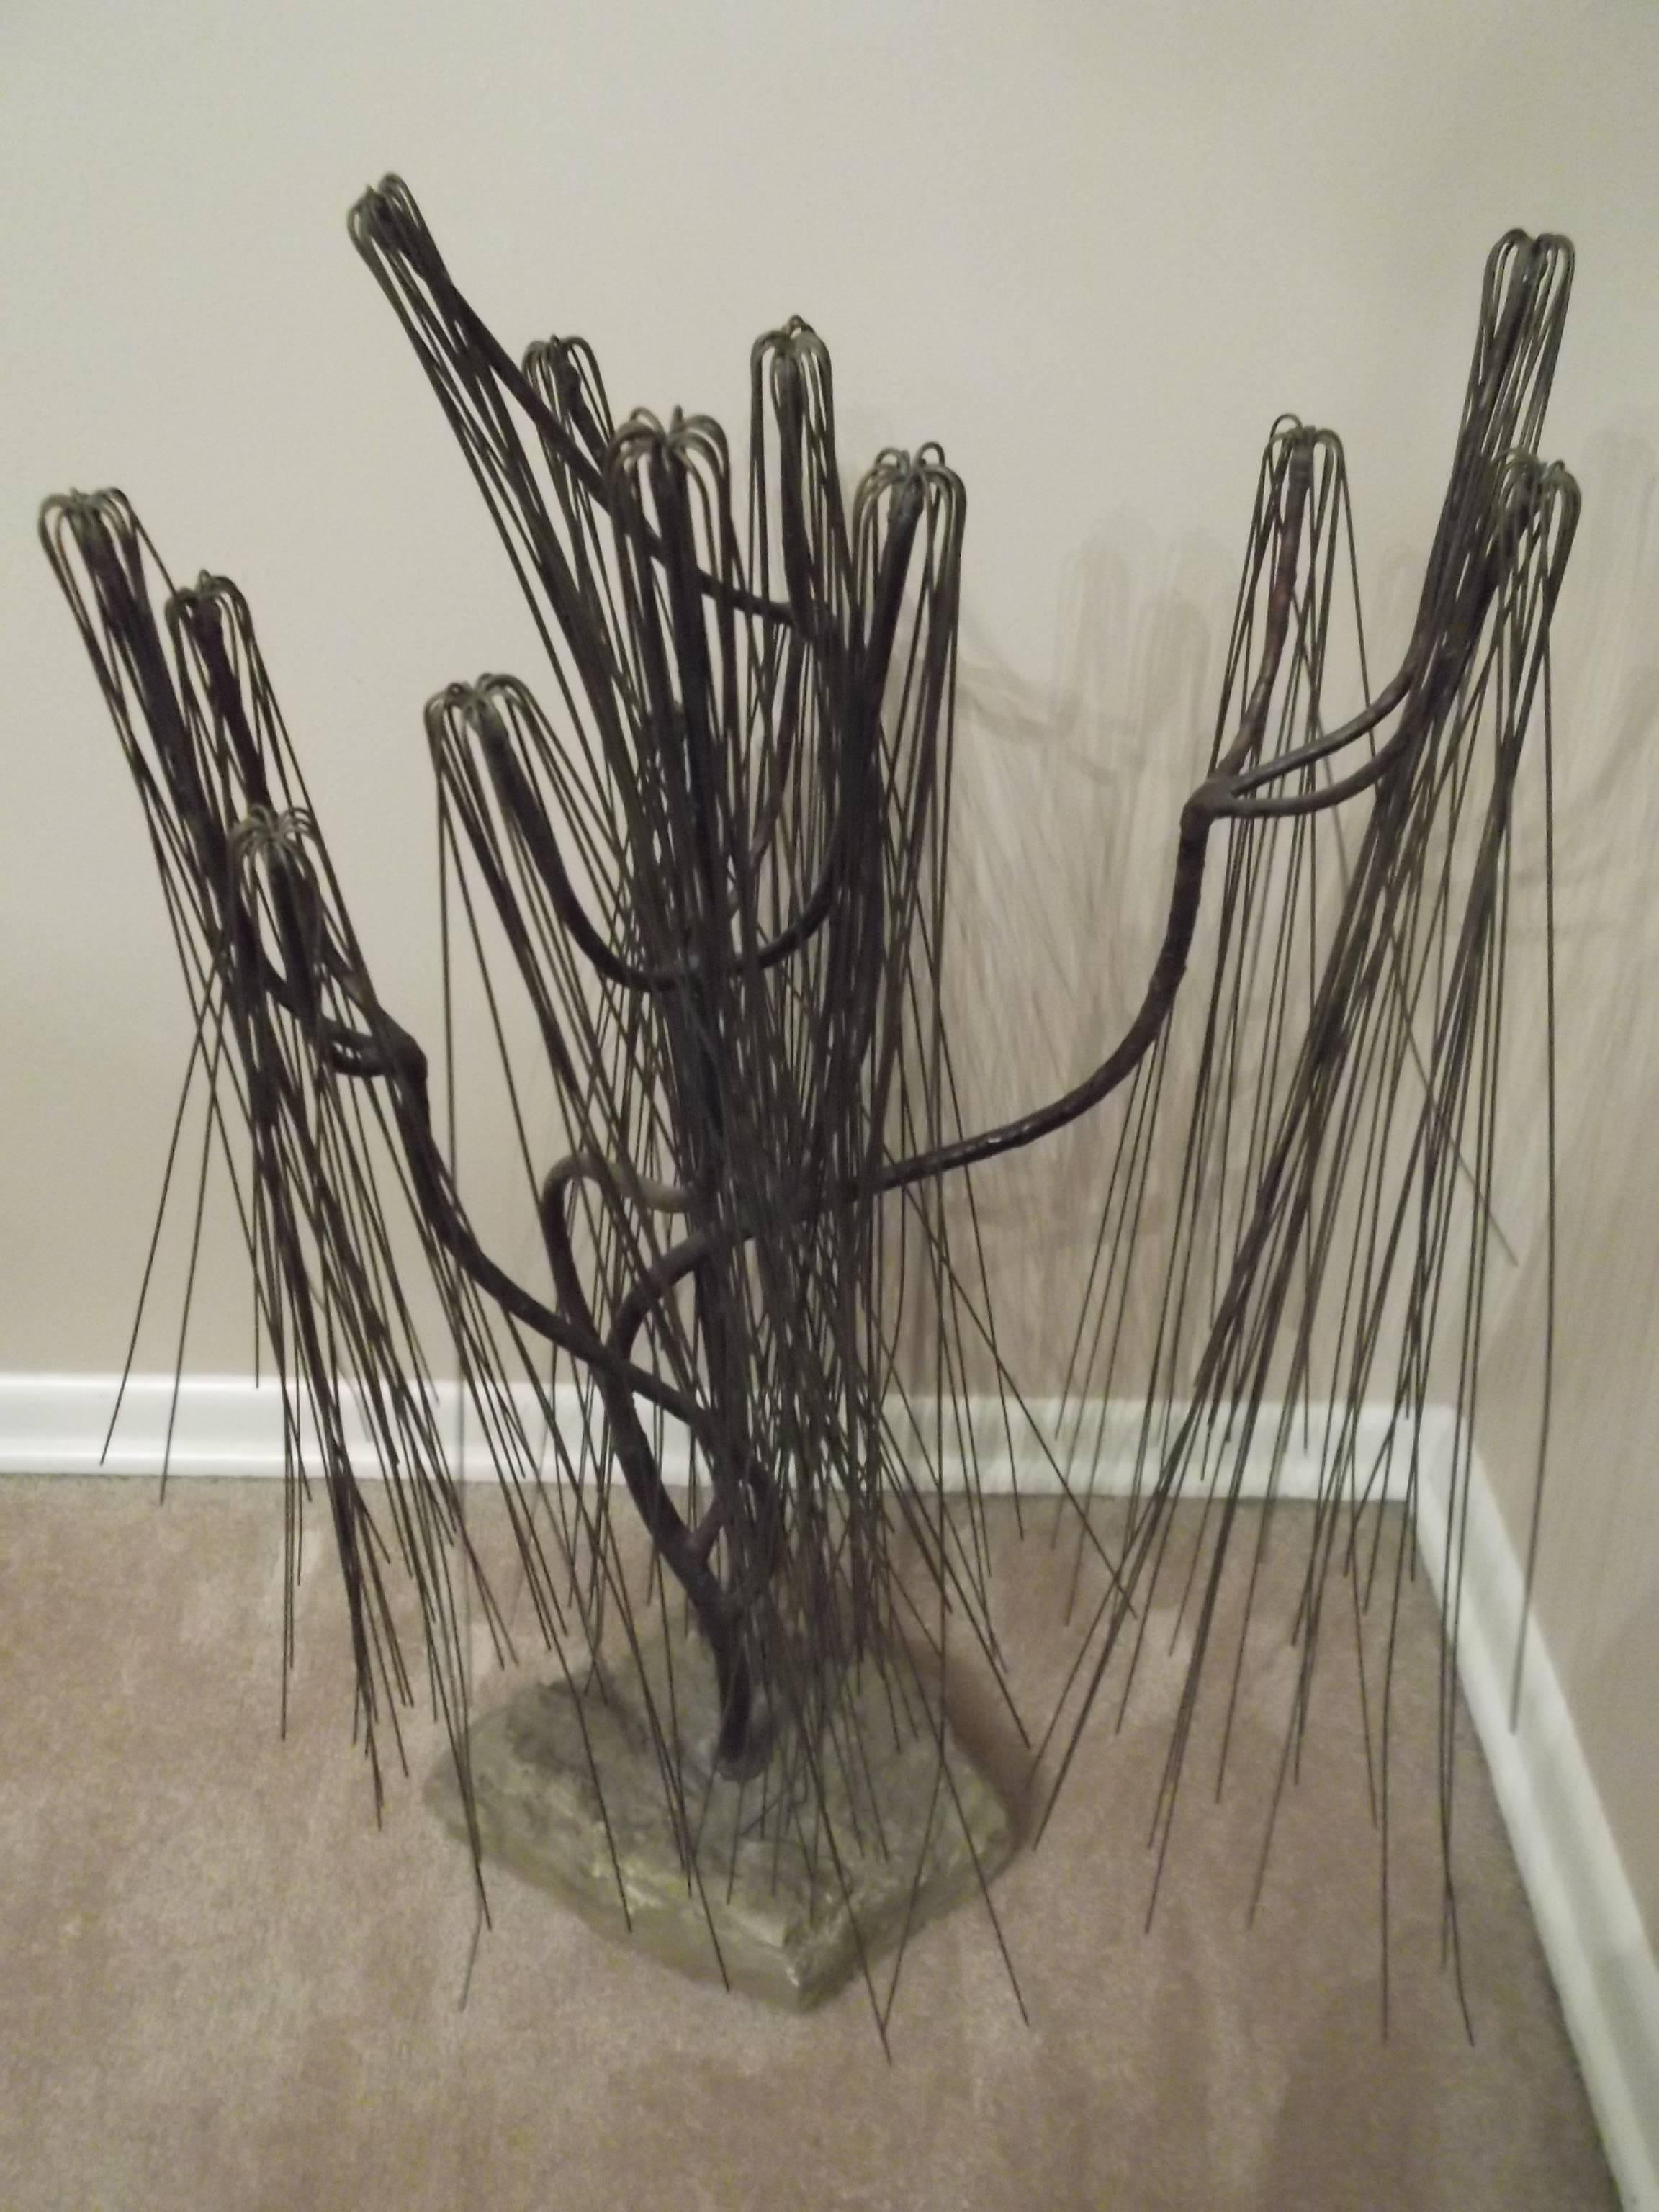 This is a vintage piece, we believe to be from the 1960s era. It is an abstract form of a weeping willow tree. At least that's what my interpretation is. It has many rods welded into groups that splay out as they reach the ground. It is mounted on a